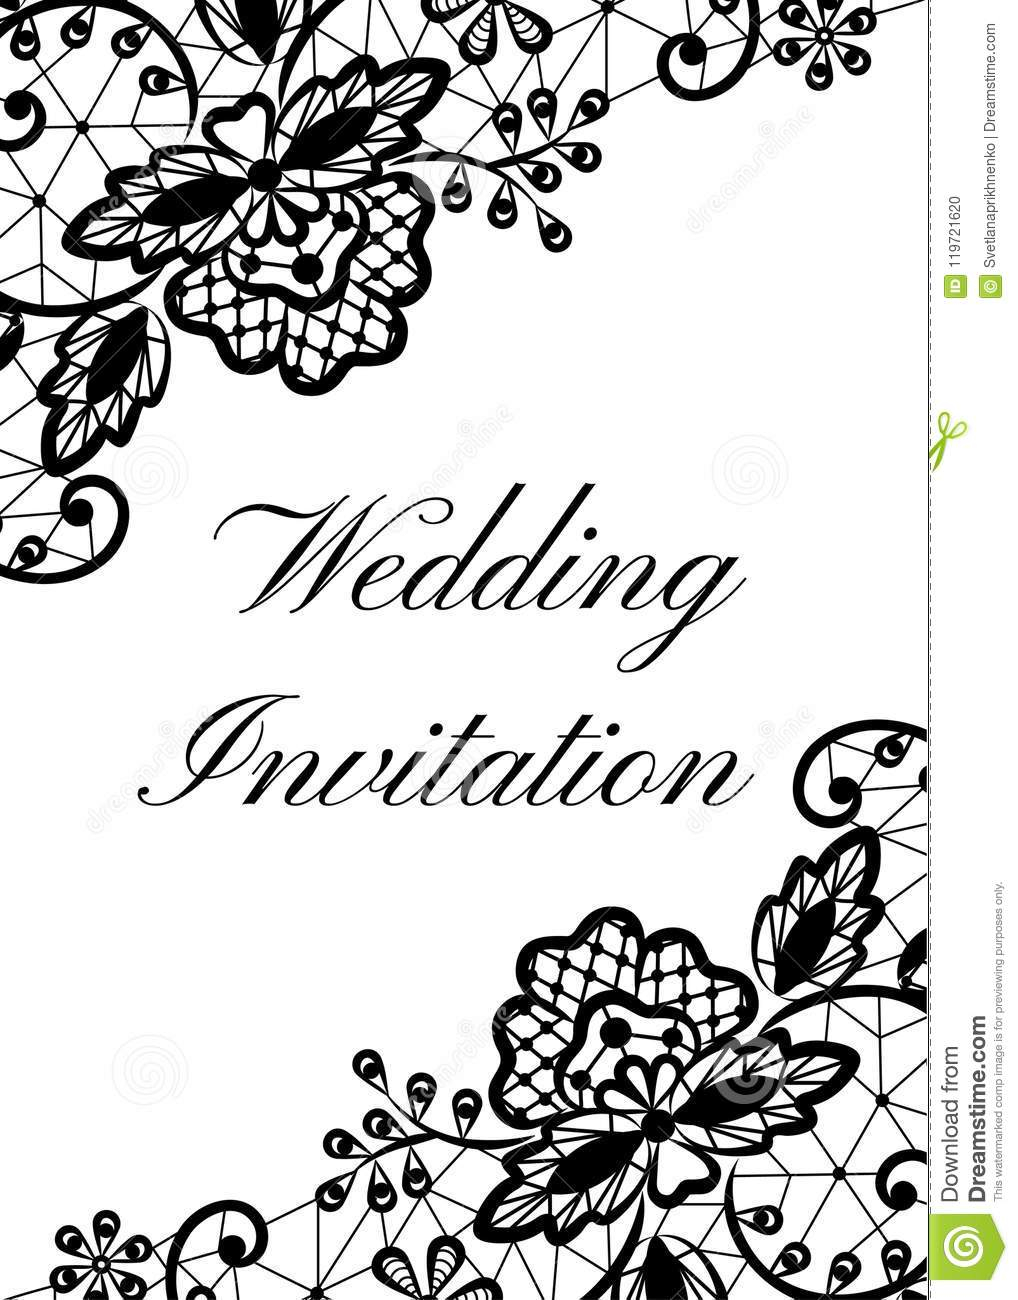 Wedding Invitation Template Stock Vector Illustration Of Banner throughout size 1018 X 1300